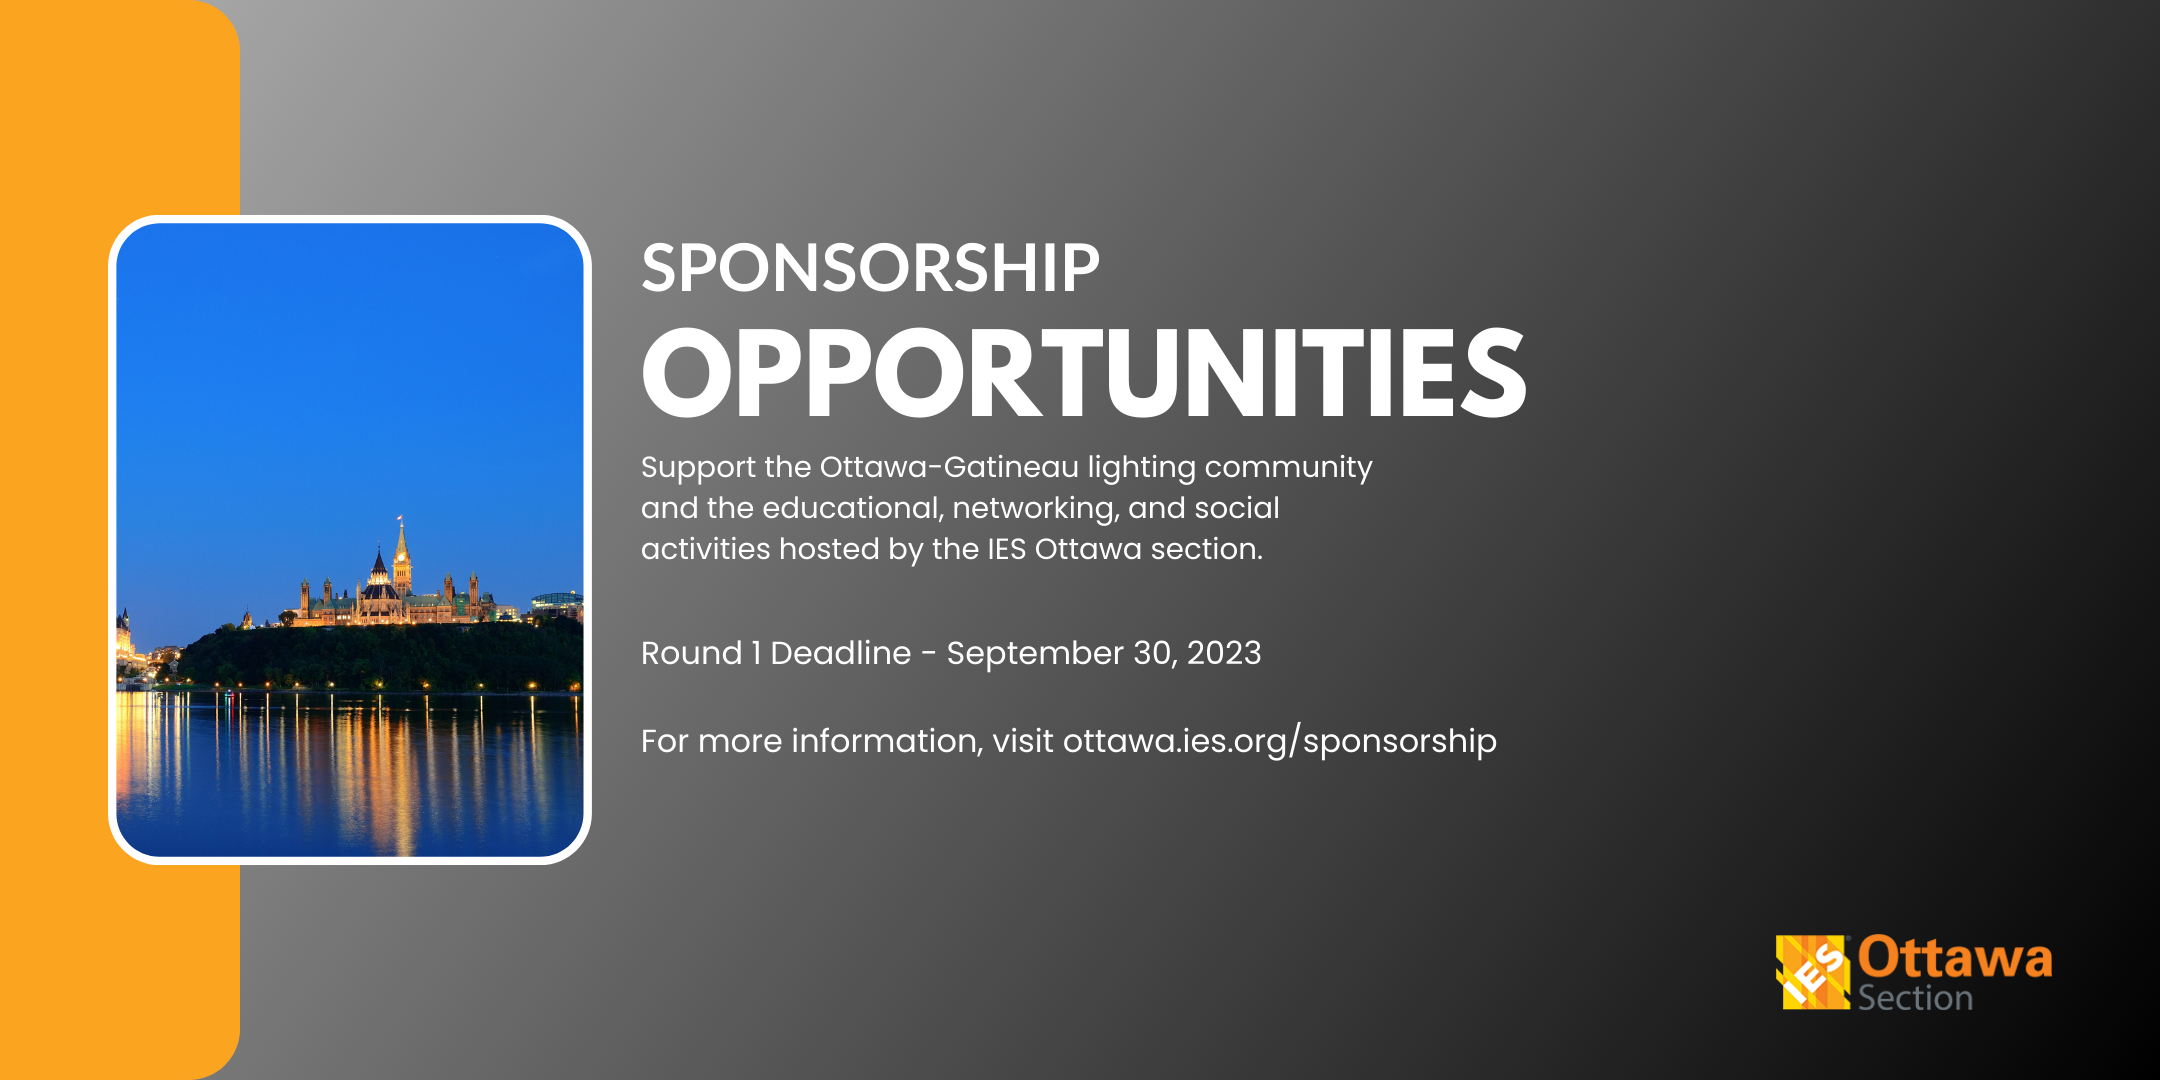 Sponsor the IES Ottawa - Support the educational, networking, and social activities hosted by the IES Ottawa section